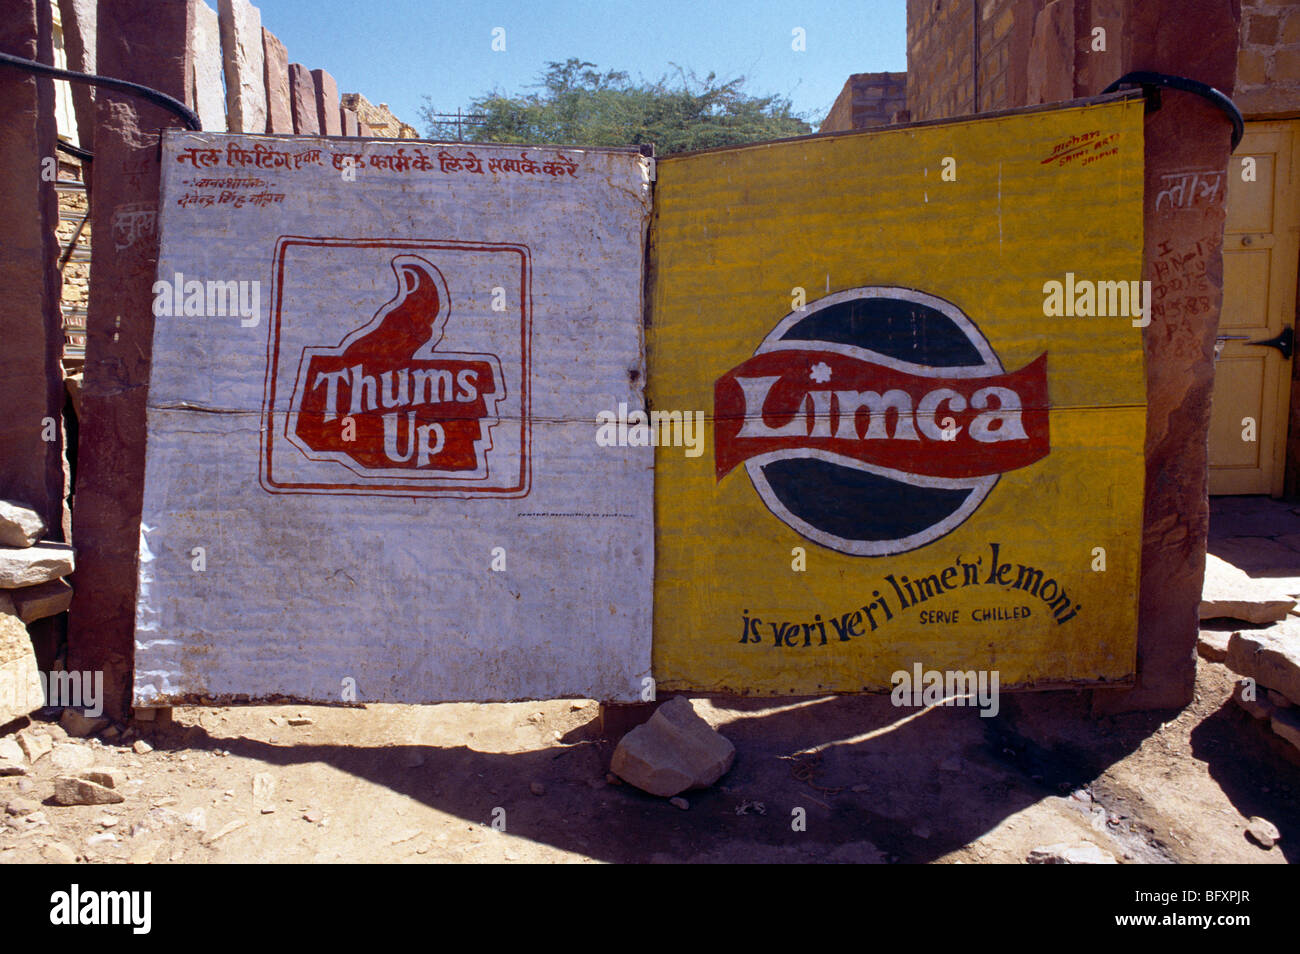 Jaisalmer India Doors With Adverts Thums Up Cola & Limca Stock Photo